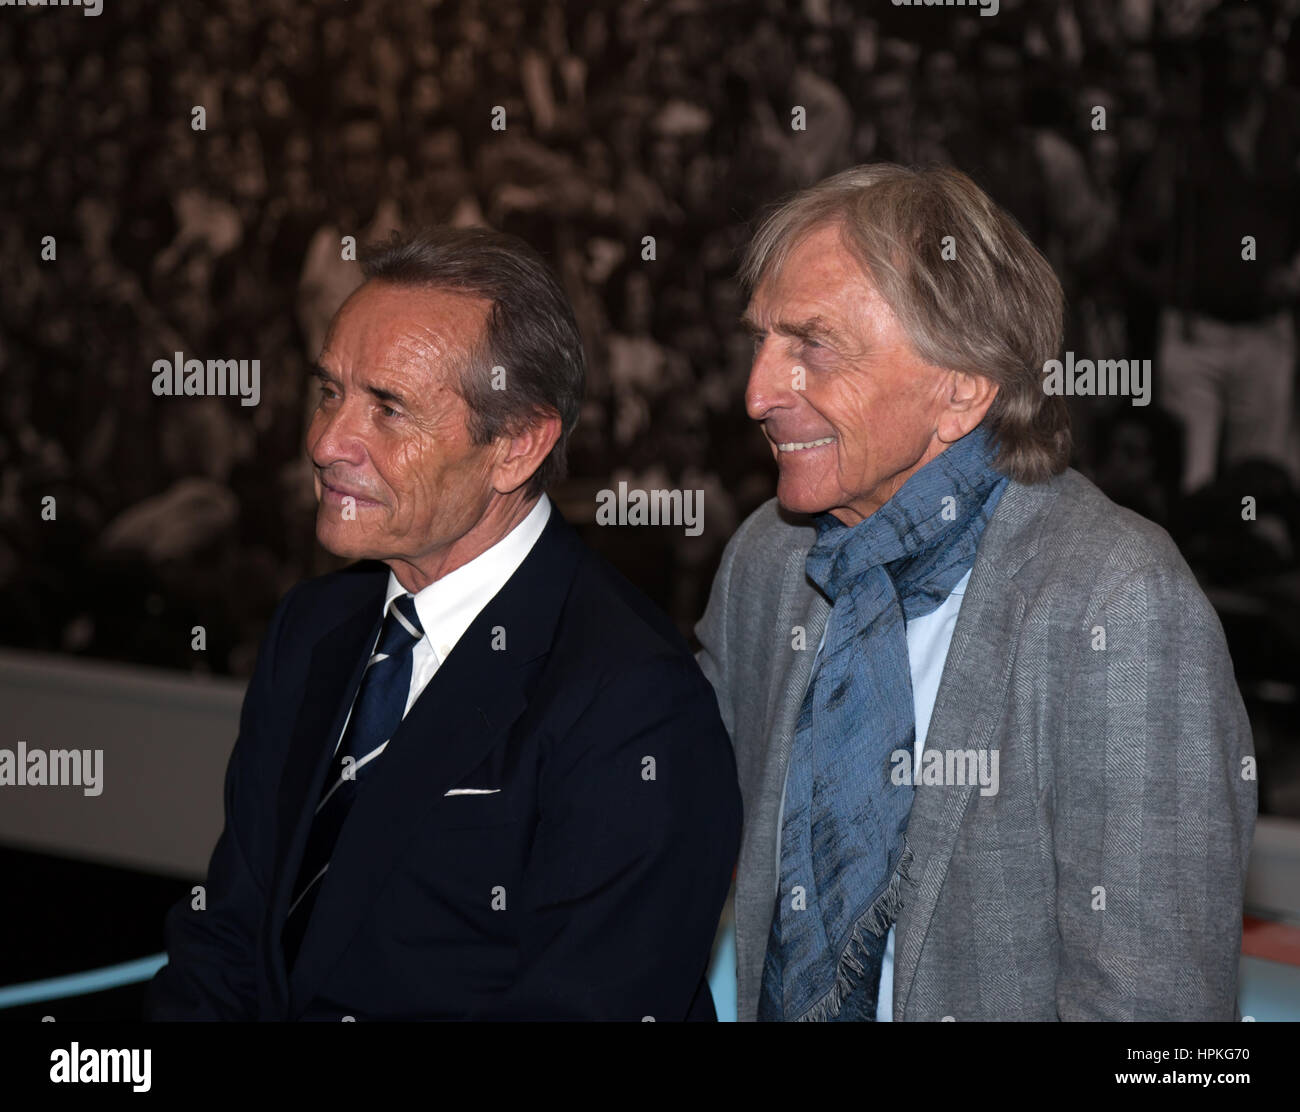 Photo call with Jacky Ickx and Derek Bell, at the Ickx Icon Collection. at the 2017 London Classic Car Show. Stock Photo